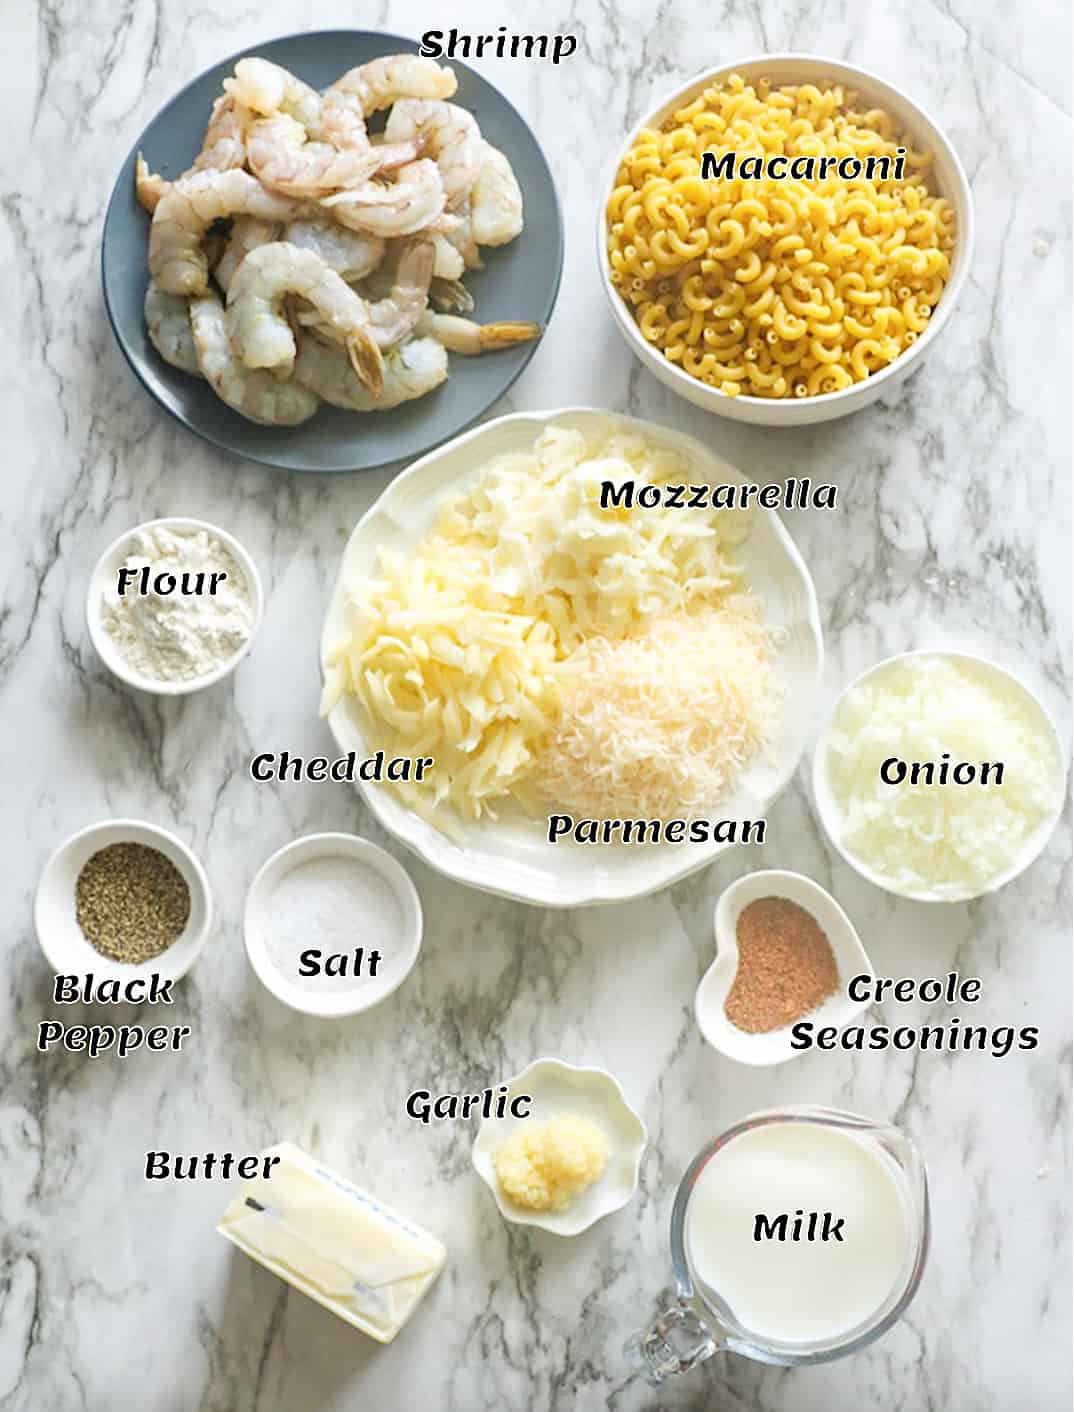 Shrimp mac and cheese ingredients